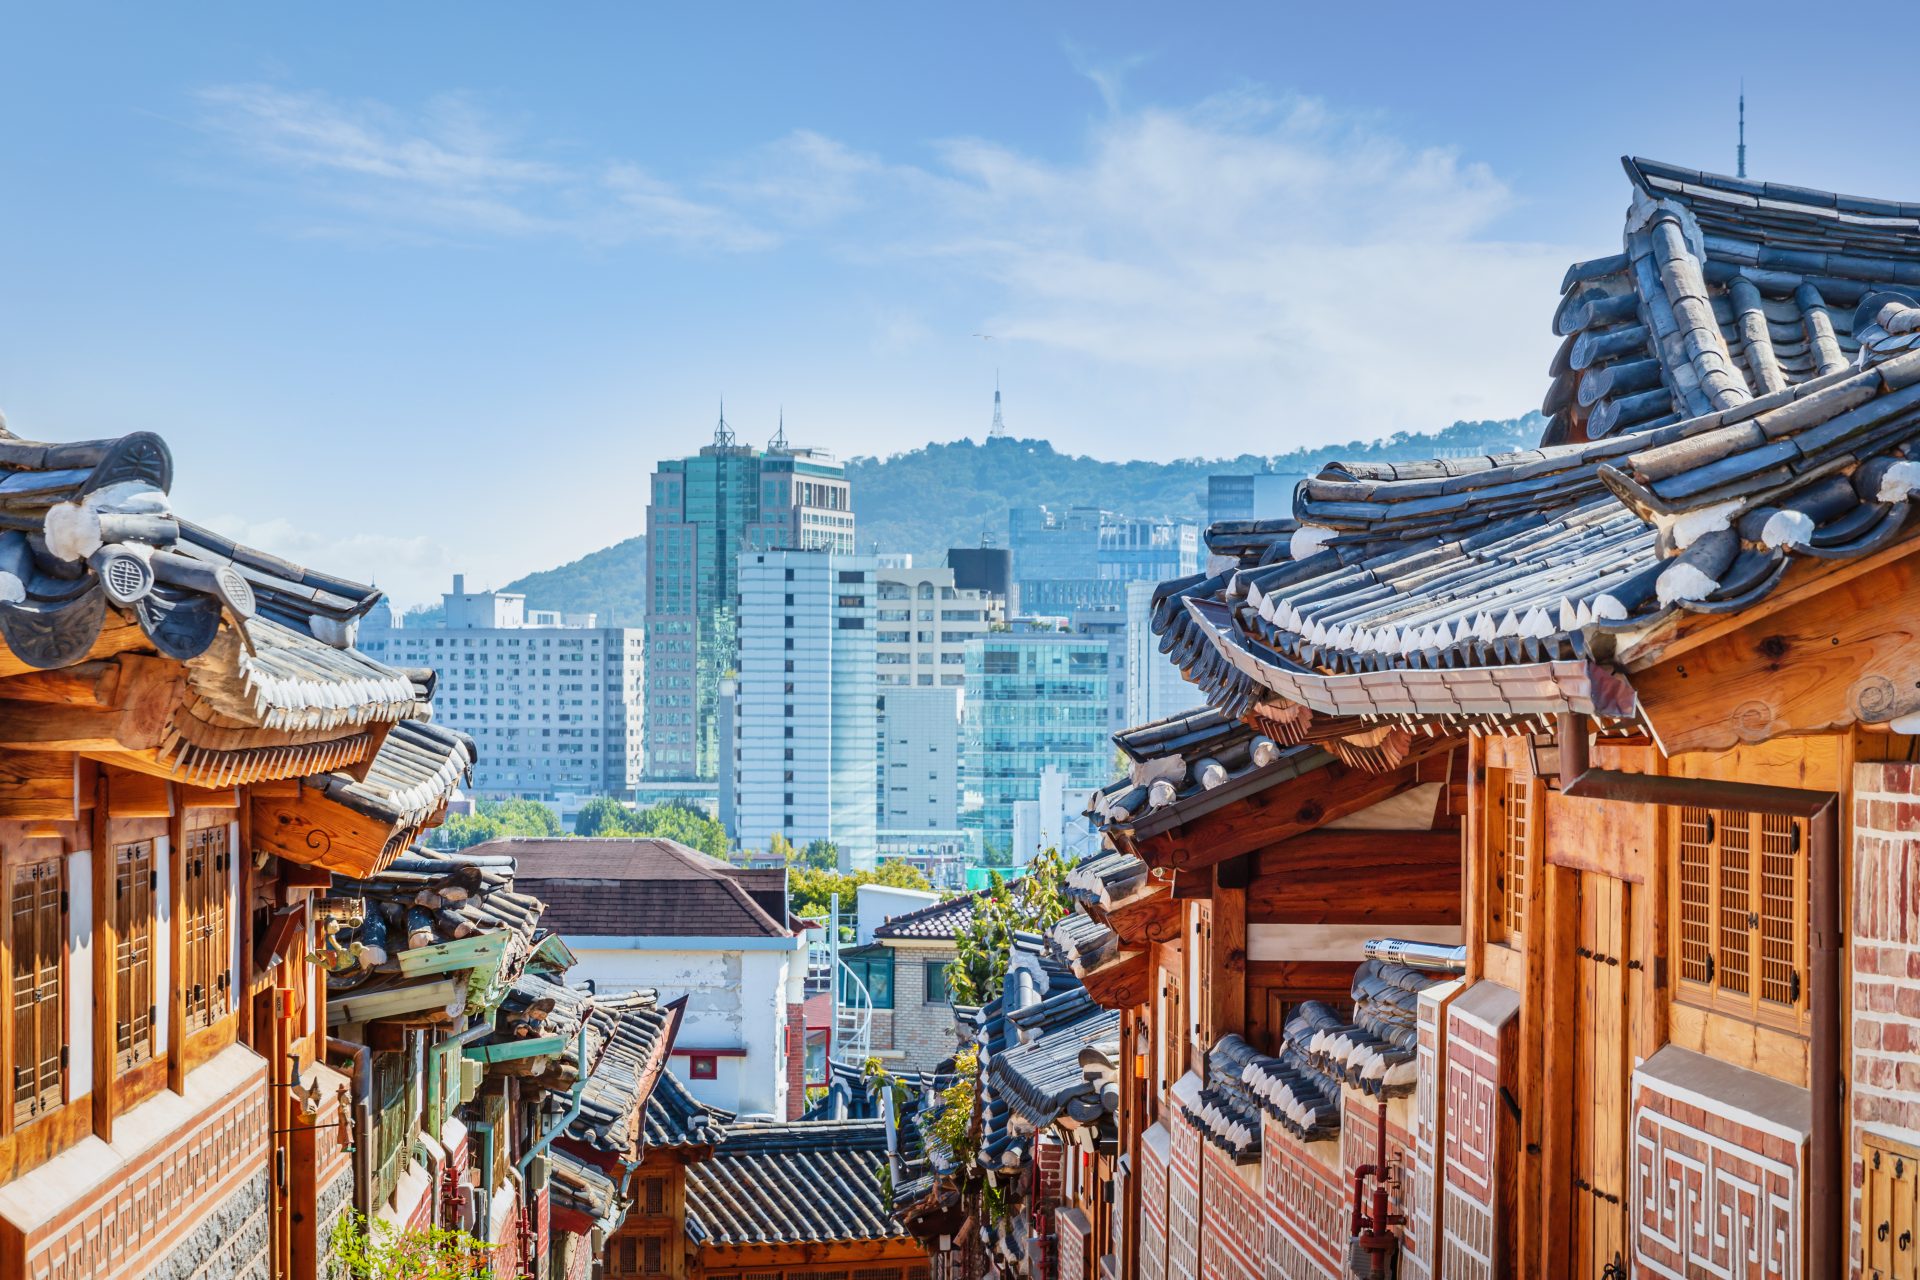 <p>In this village, Hanok, the traditional Korean houses, are clustered on a slope. The royal family and aristocrats of the Joseon Dynasty lived in these Hanok, so the village exudes elegance.</p>